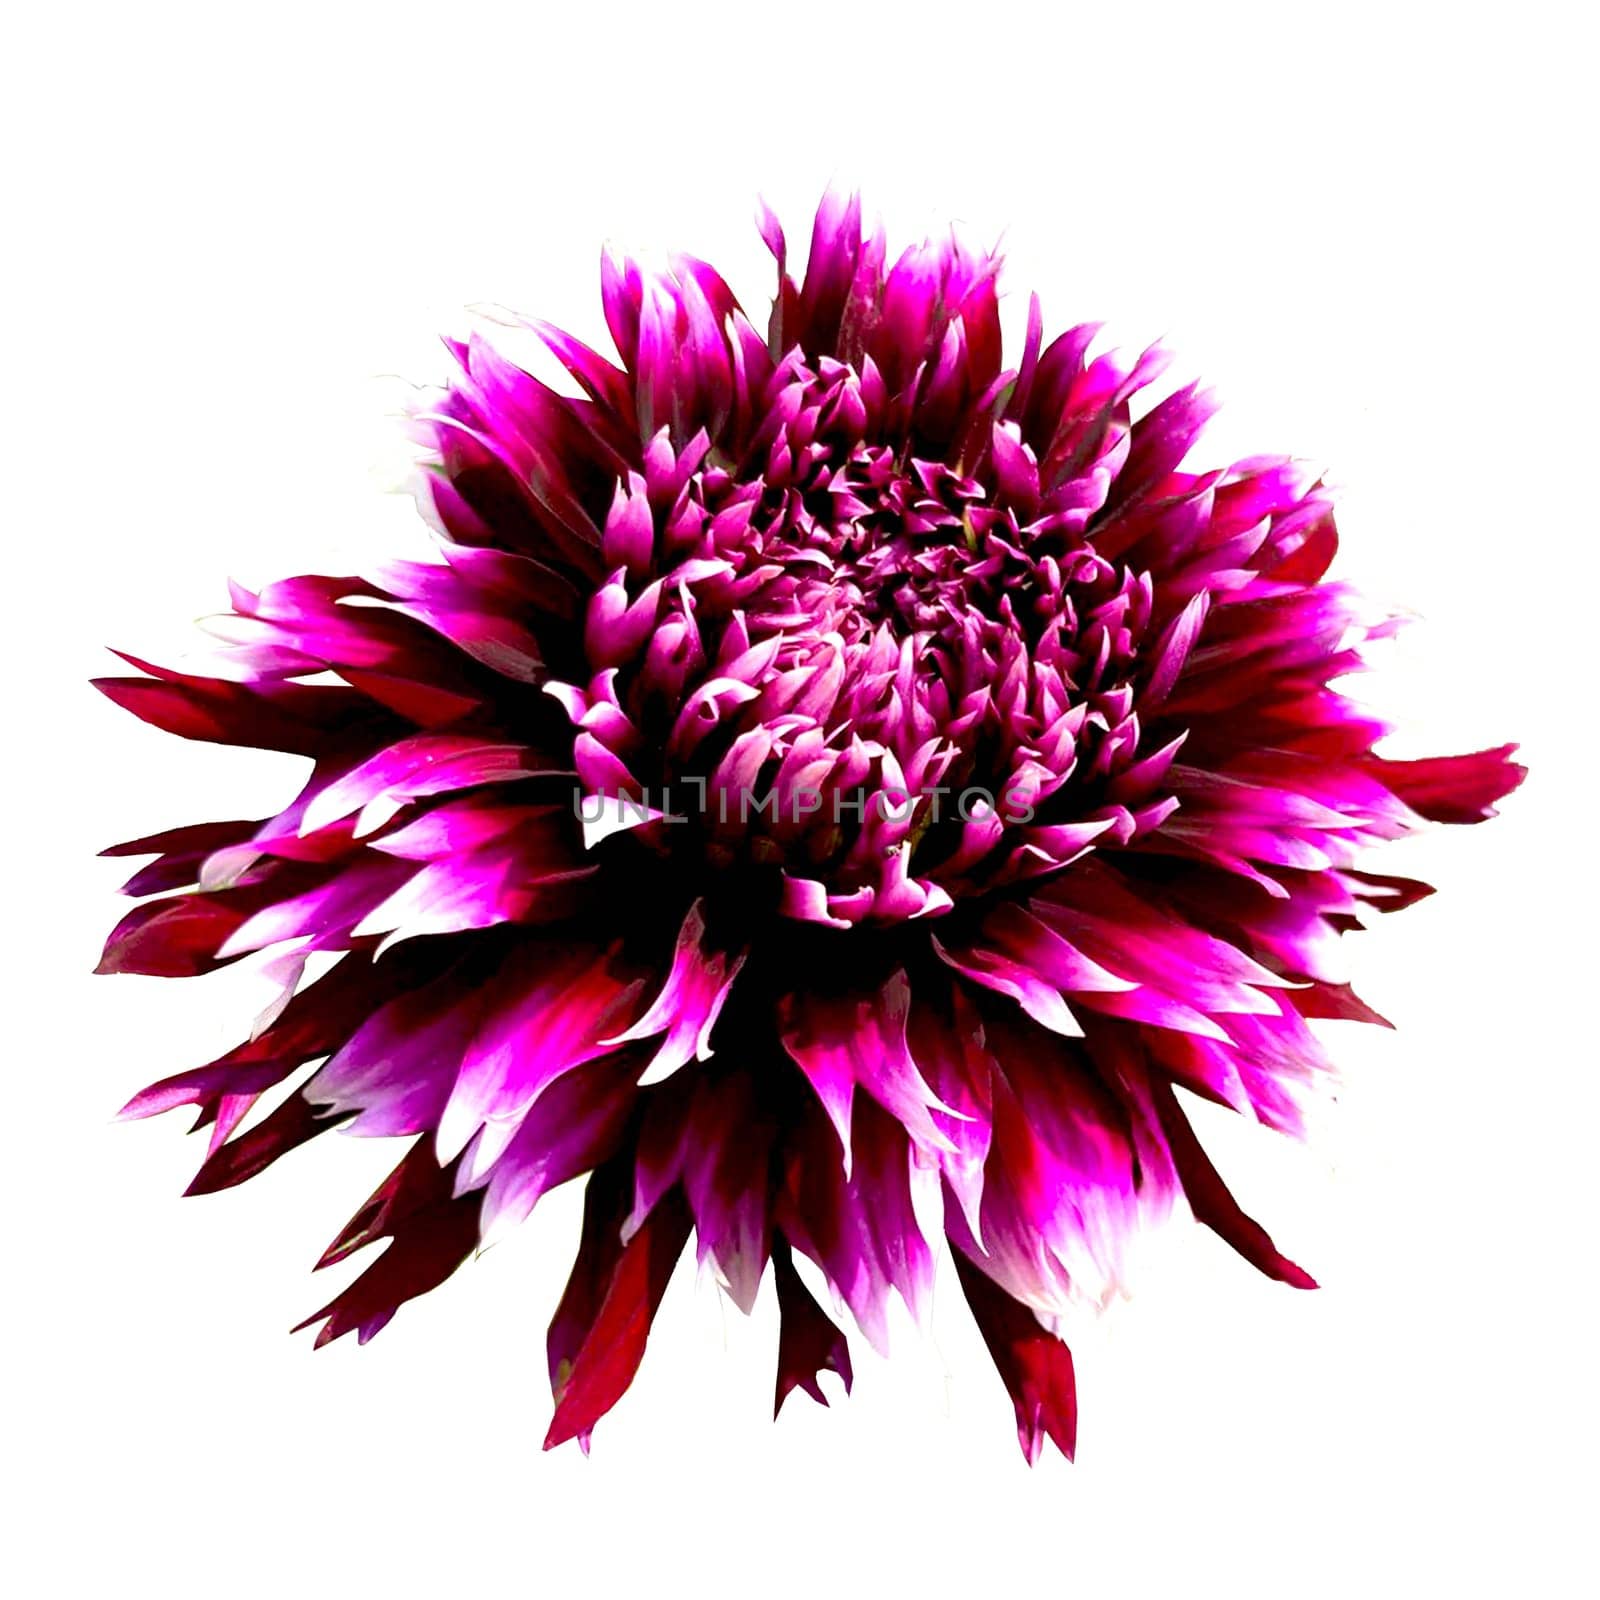 Star purple Dahlia flower isolated on white background. High quality photo